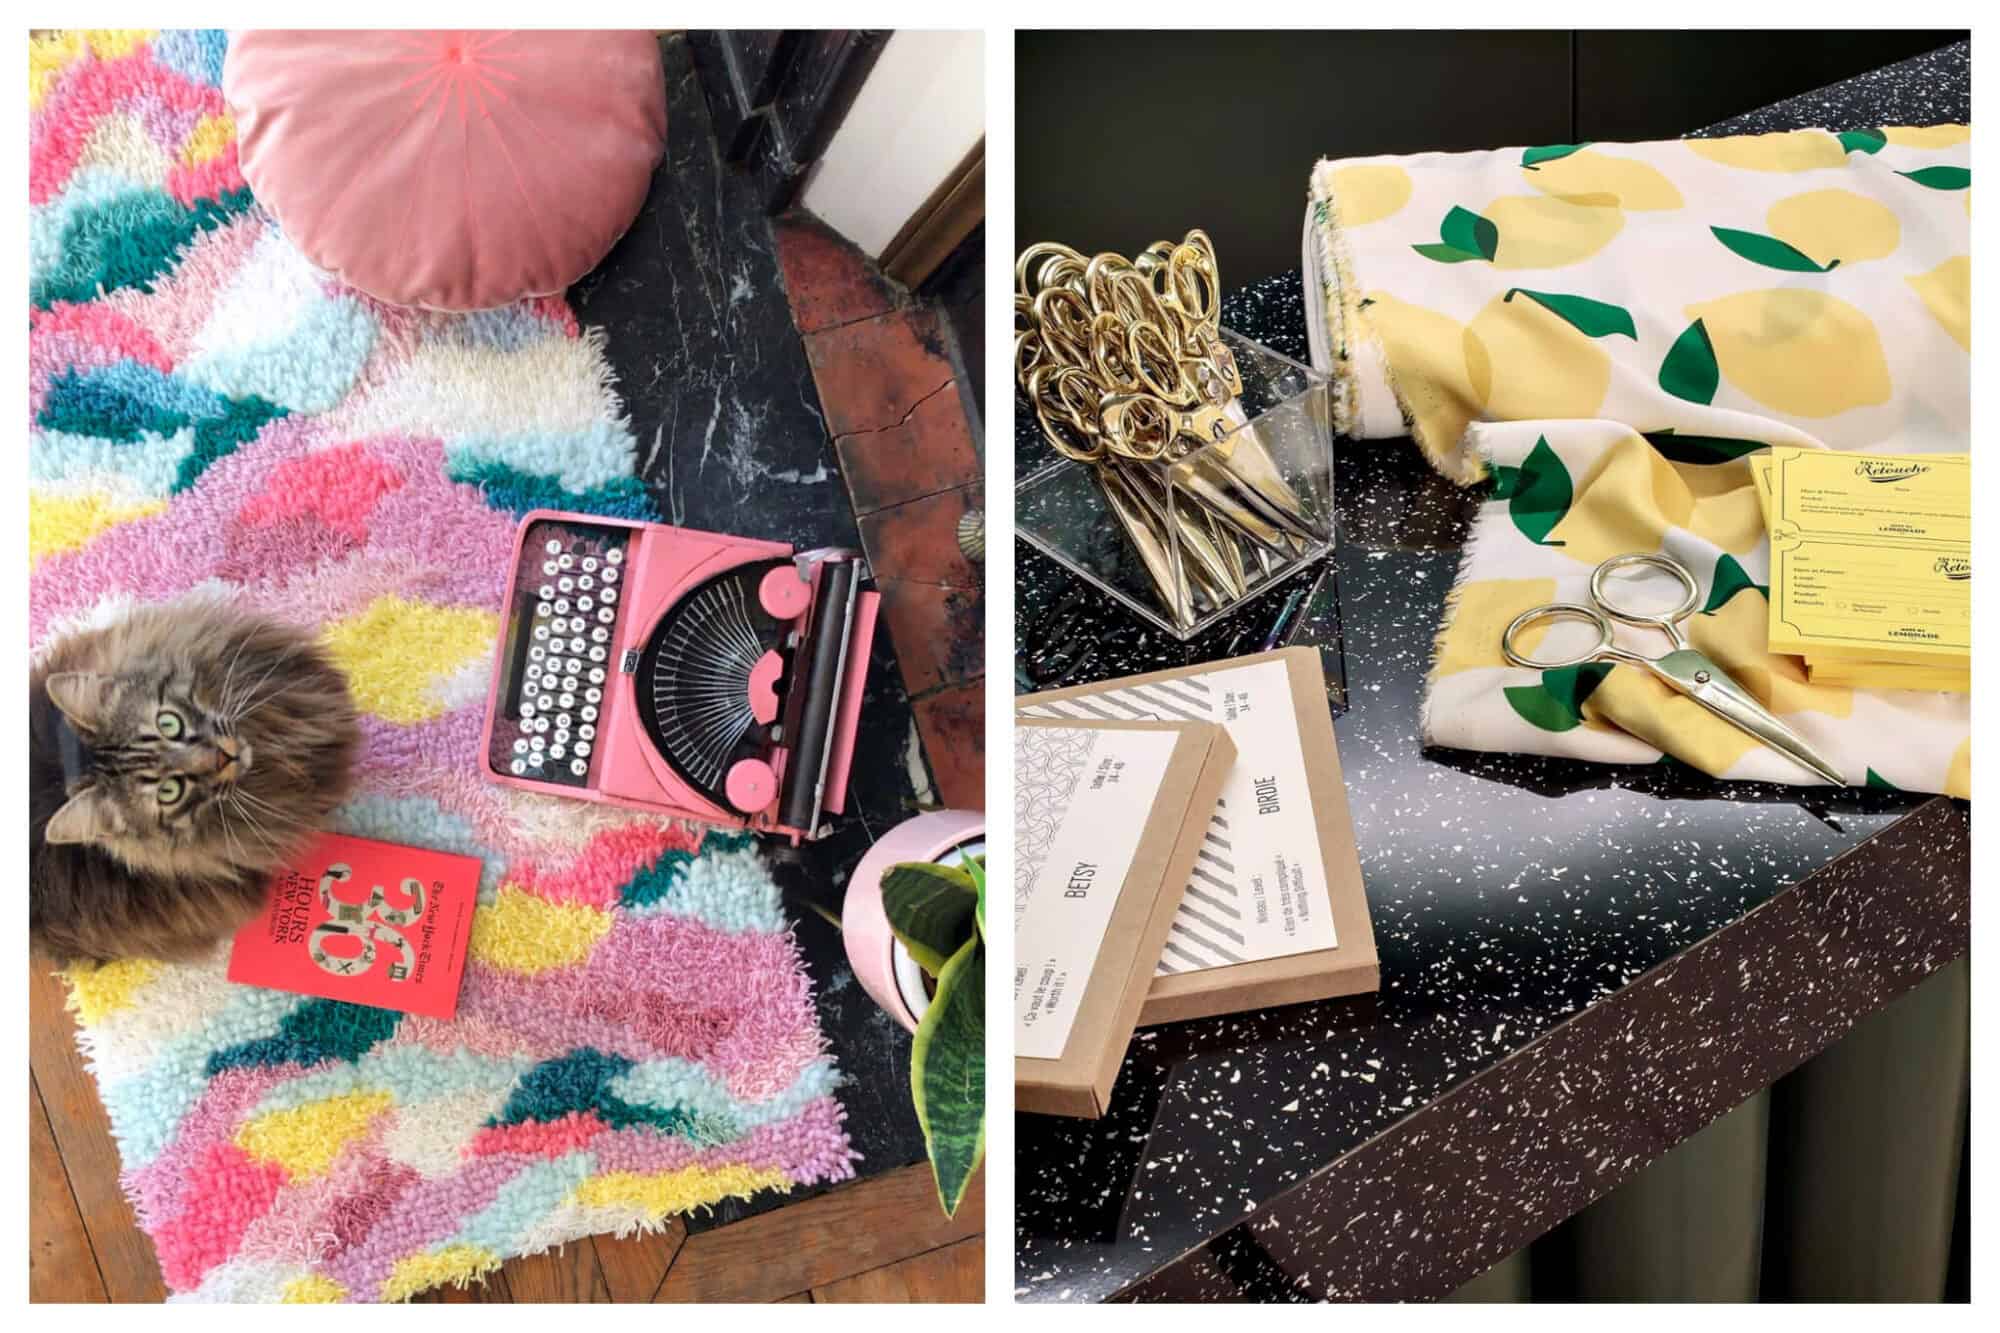 Left: a multi-colored crochet rug on the floor. There is a pink circular cushion, a pink type writer, a pot plant, a book, and a grey long-haired cat looking up at the viewer.
Right: a roll of fabric with yellow lemons on it on a black and white speckled table with a box of scissors, some pattern boxes, and yellow 'retouche' forms.